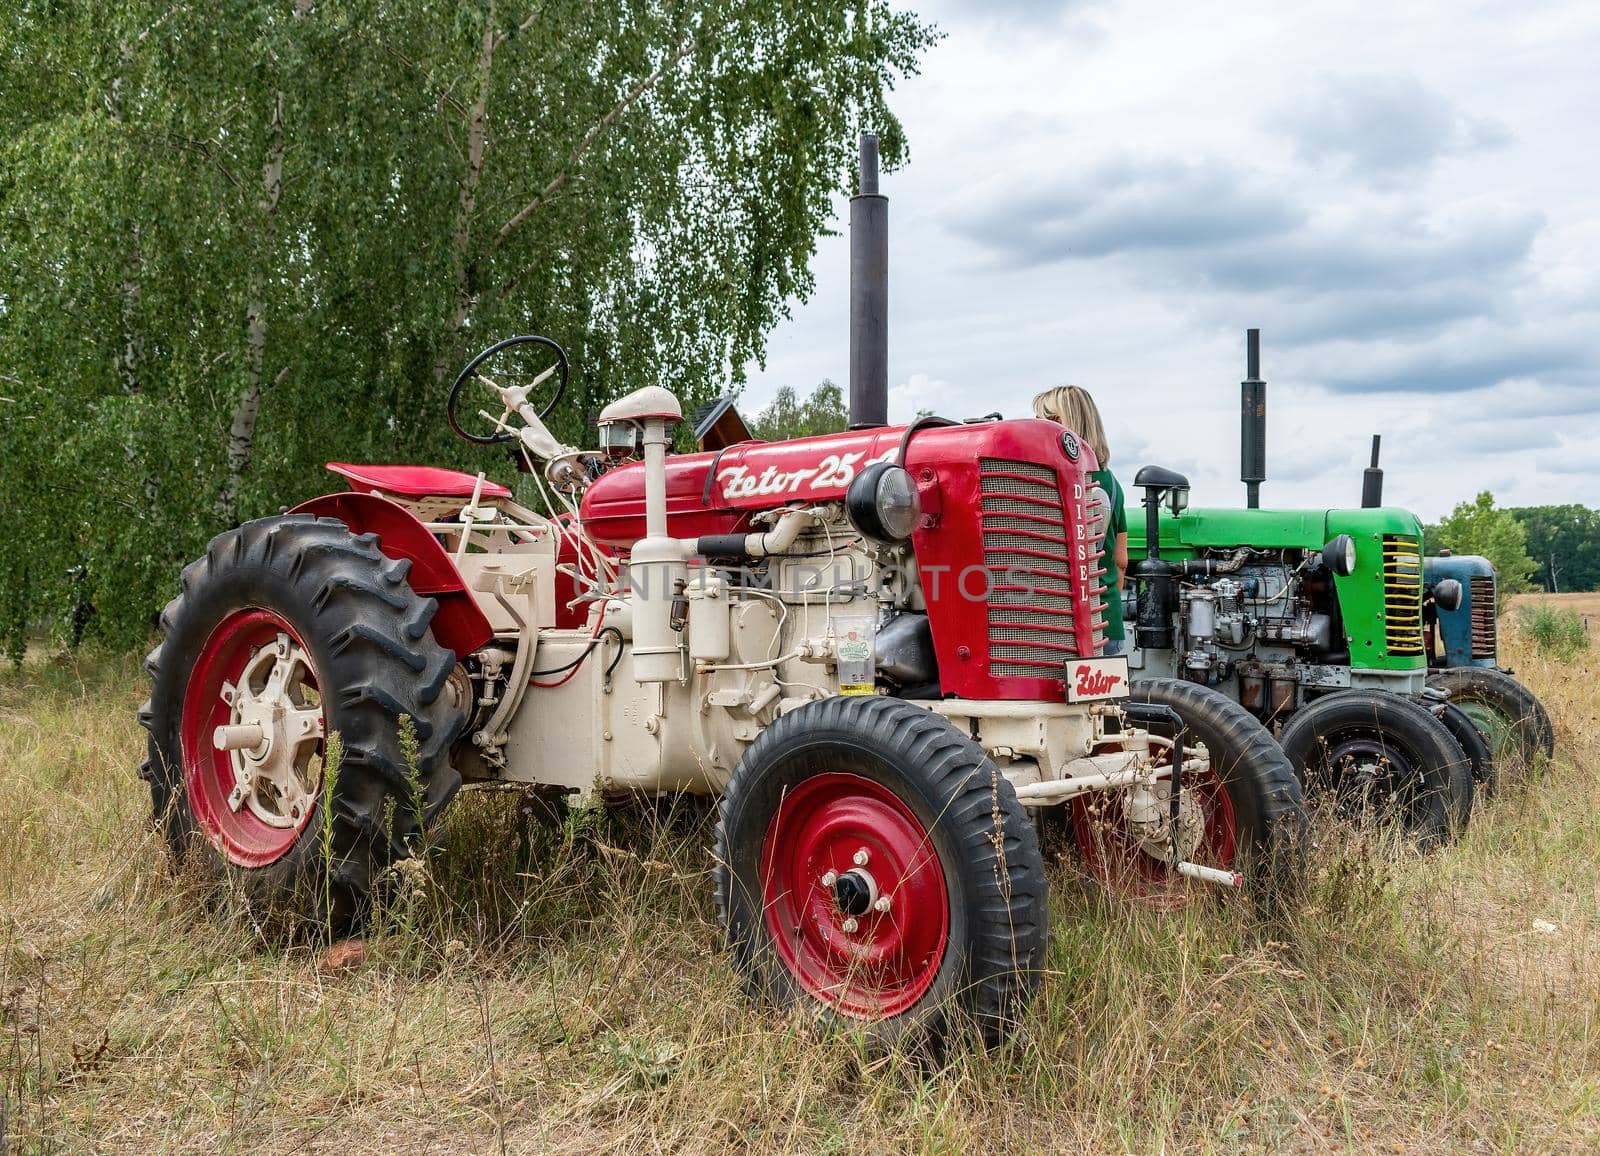 Hodonin - Panov, Czech Republic - July 20, 2022 Exhibition of contemporary and historical tractors - Zetor 25 tractor